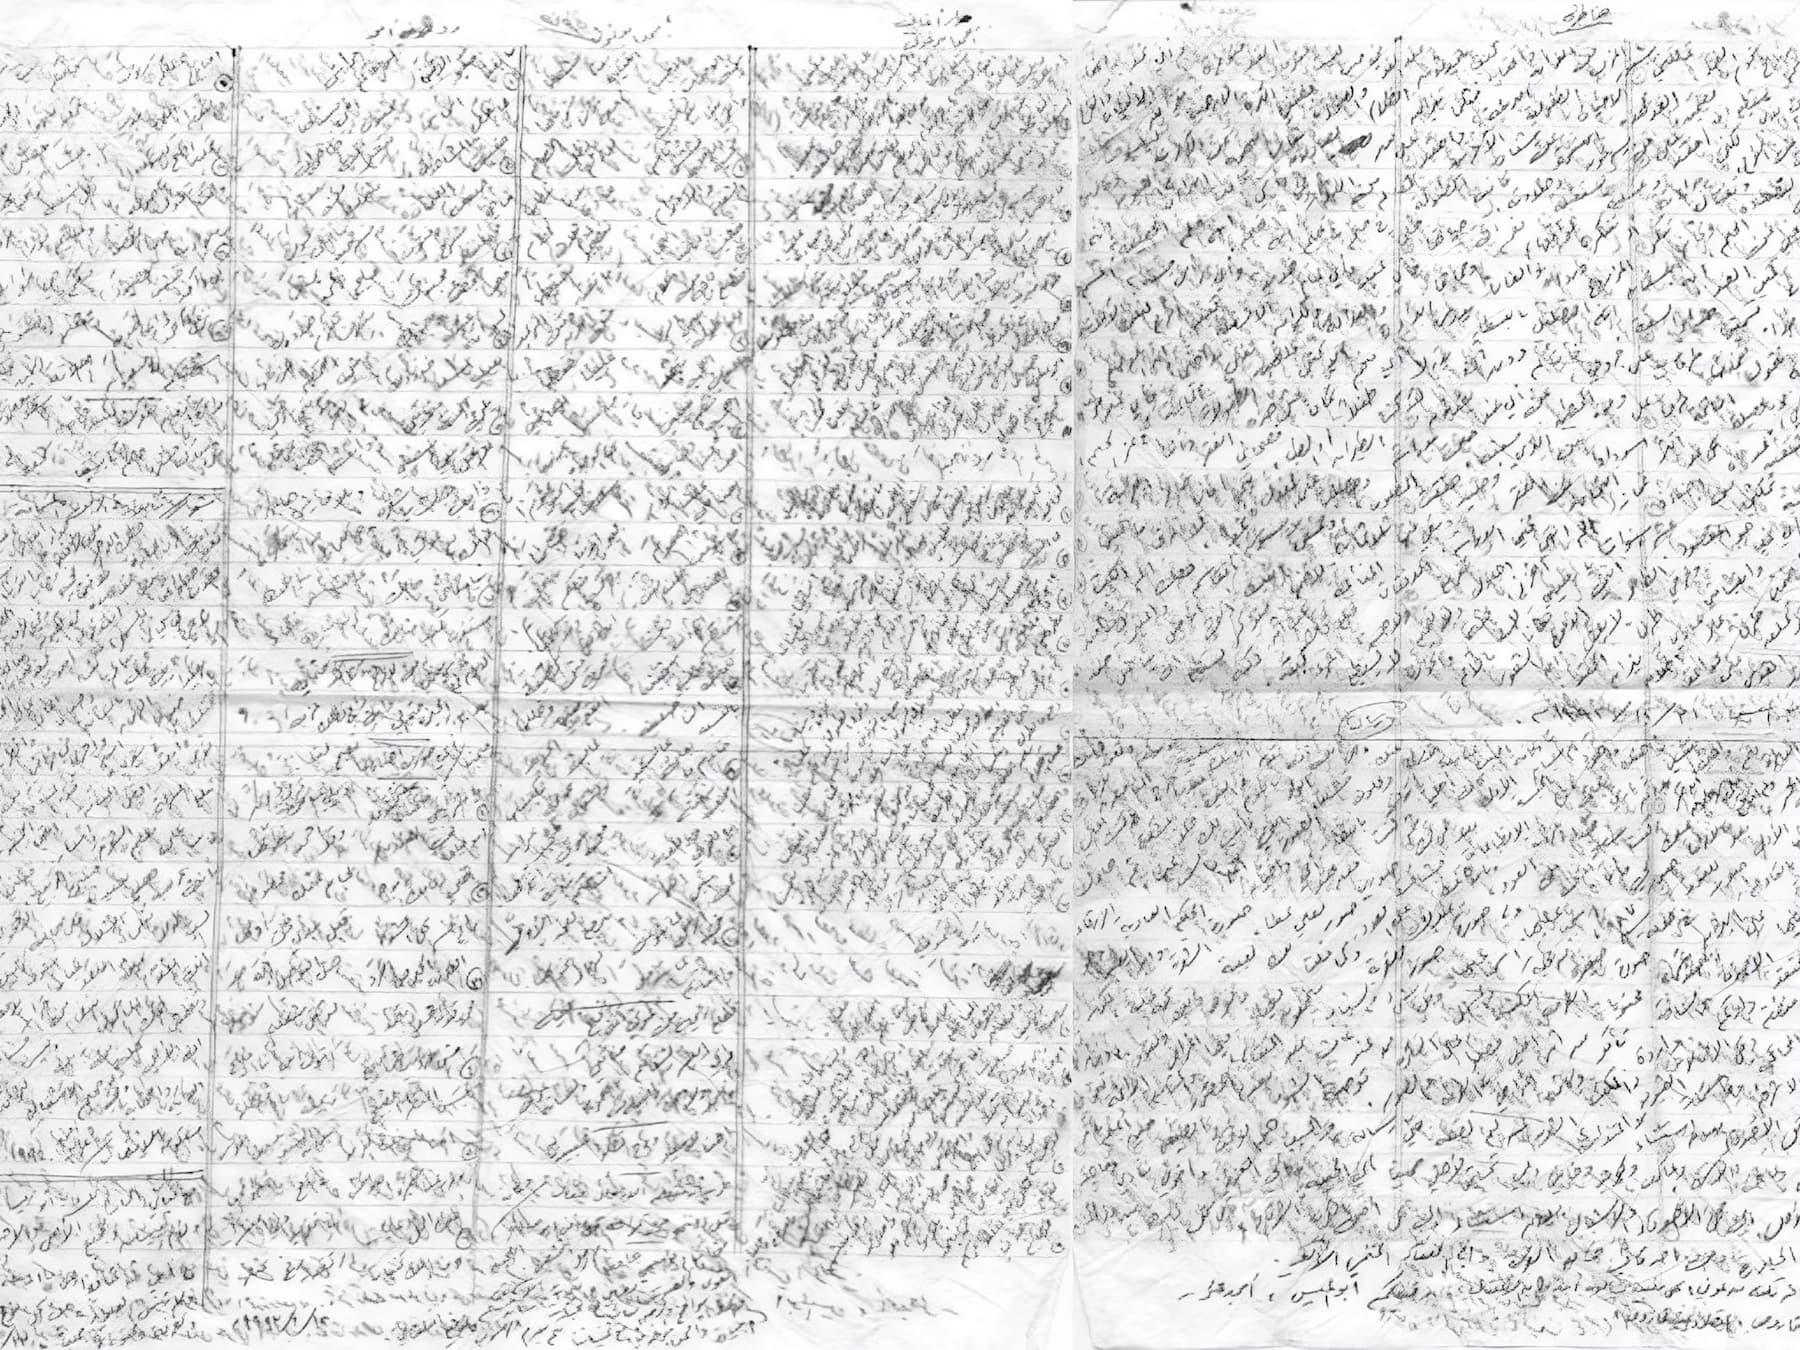 An example of msamsam handwriting on an unfolded sheet of paper, previously inside a cabsulih. From Esmail Nashif, “Building the Community: The Body, the Material Conditions, and the Communication Networks,” in Palestinian Political Prisoners: Identity and Community (London: Routledge, 2010).